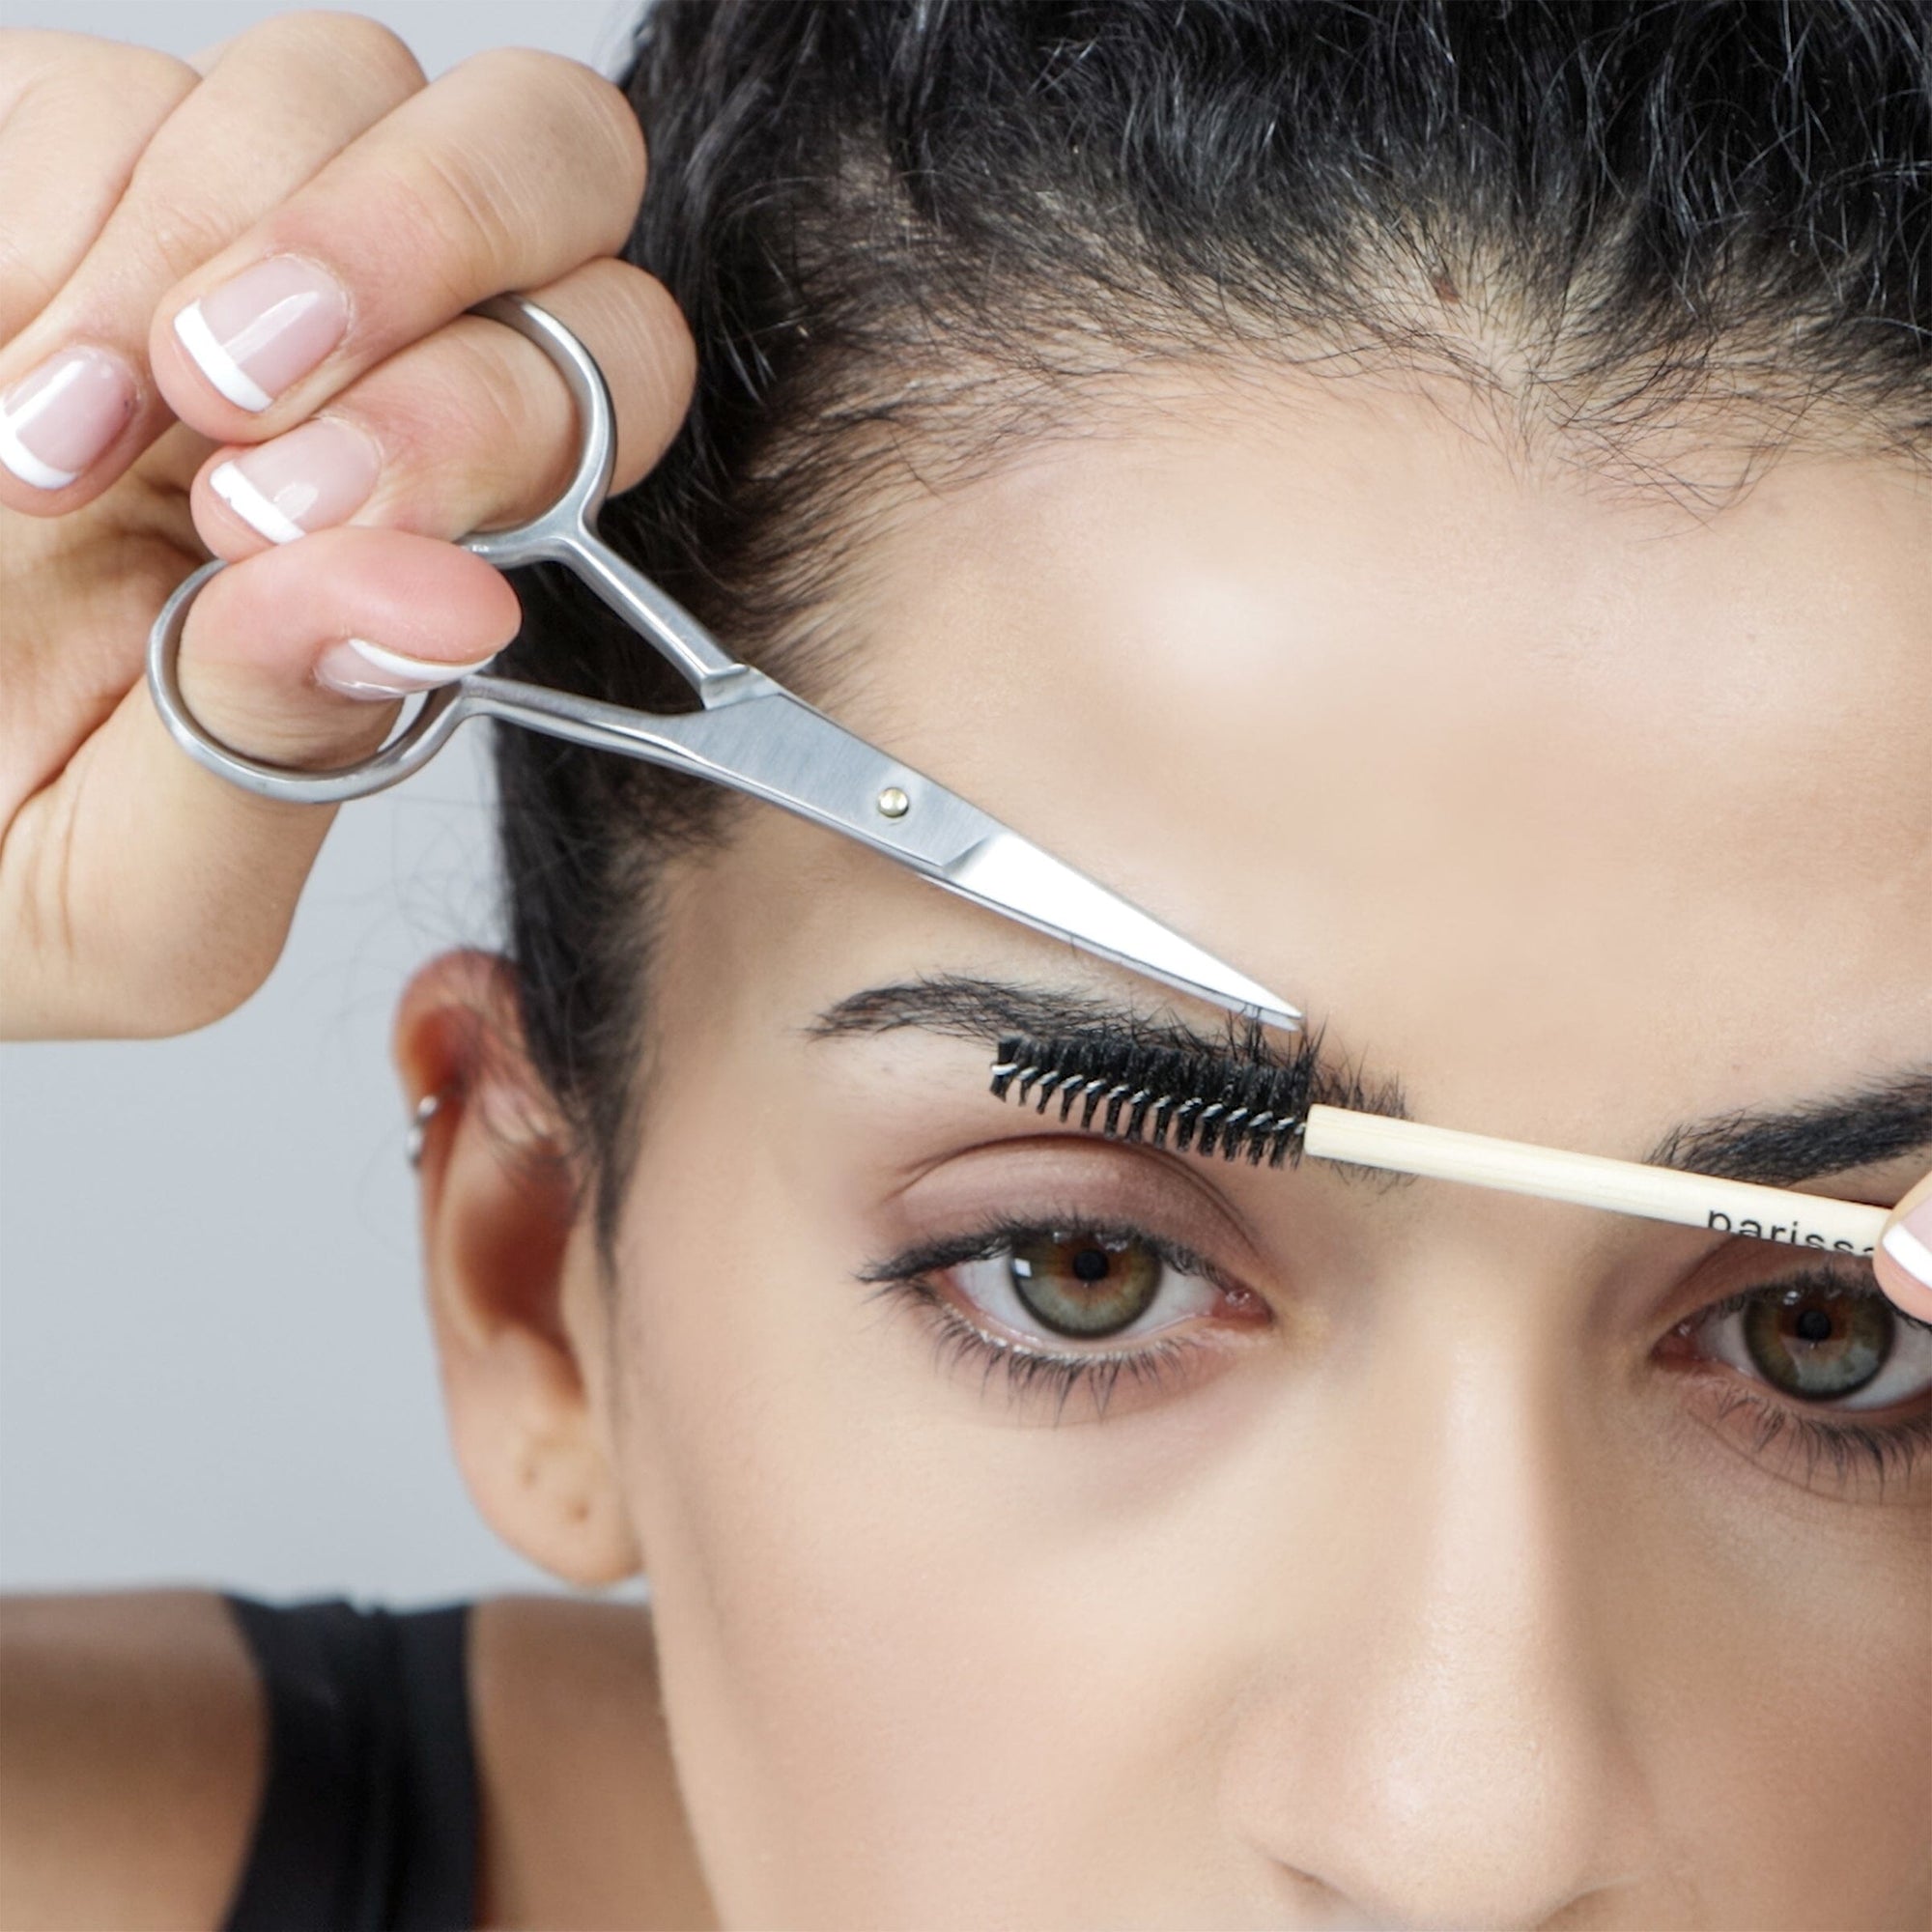 5 Steps to Your Best Eyebrow Shape